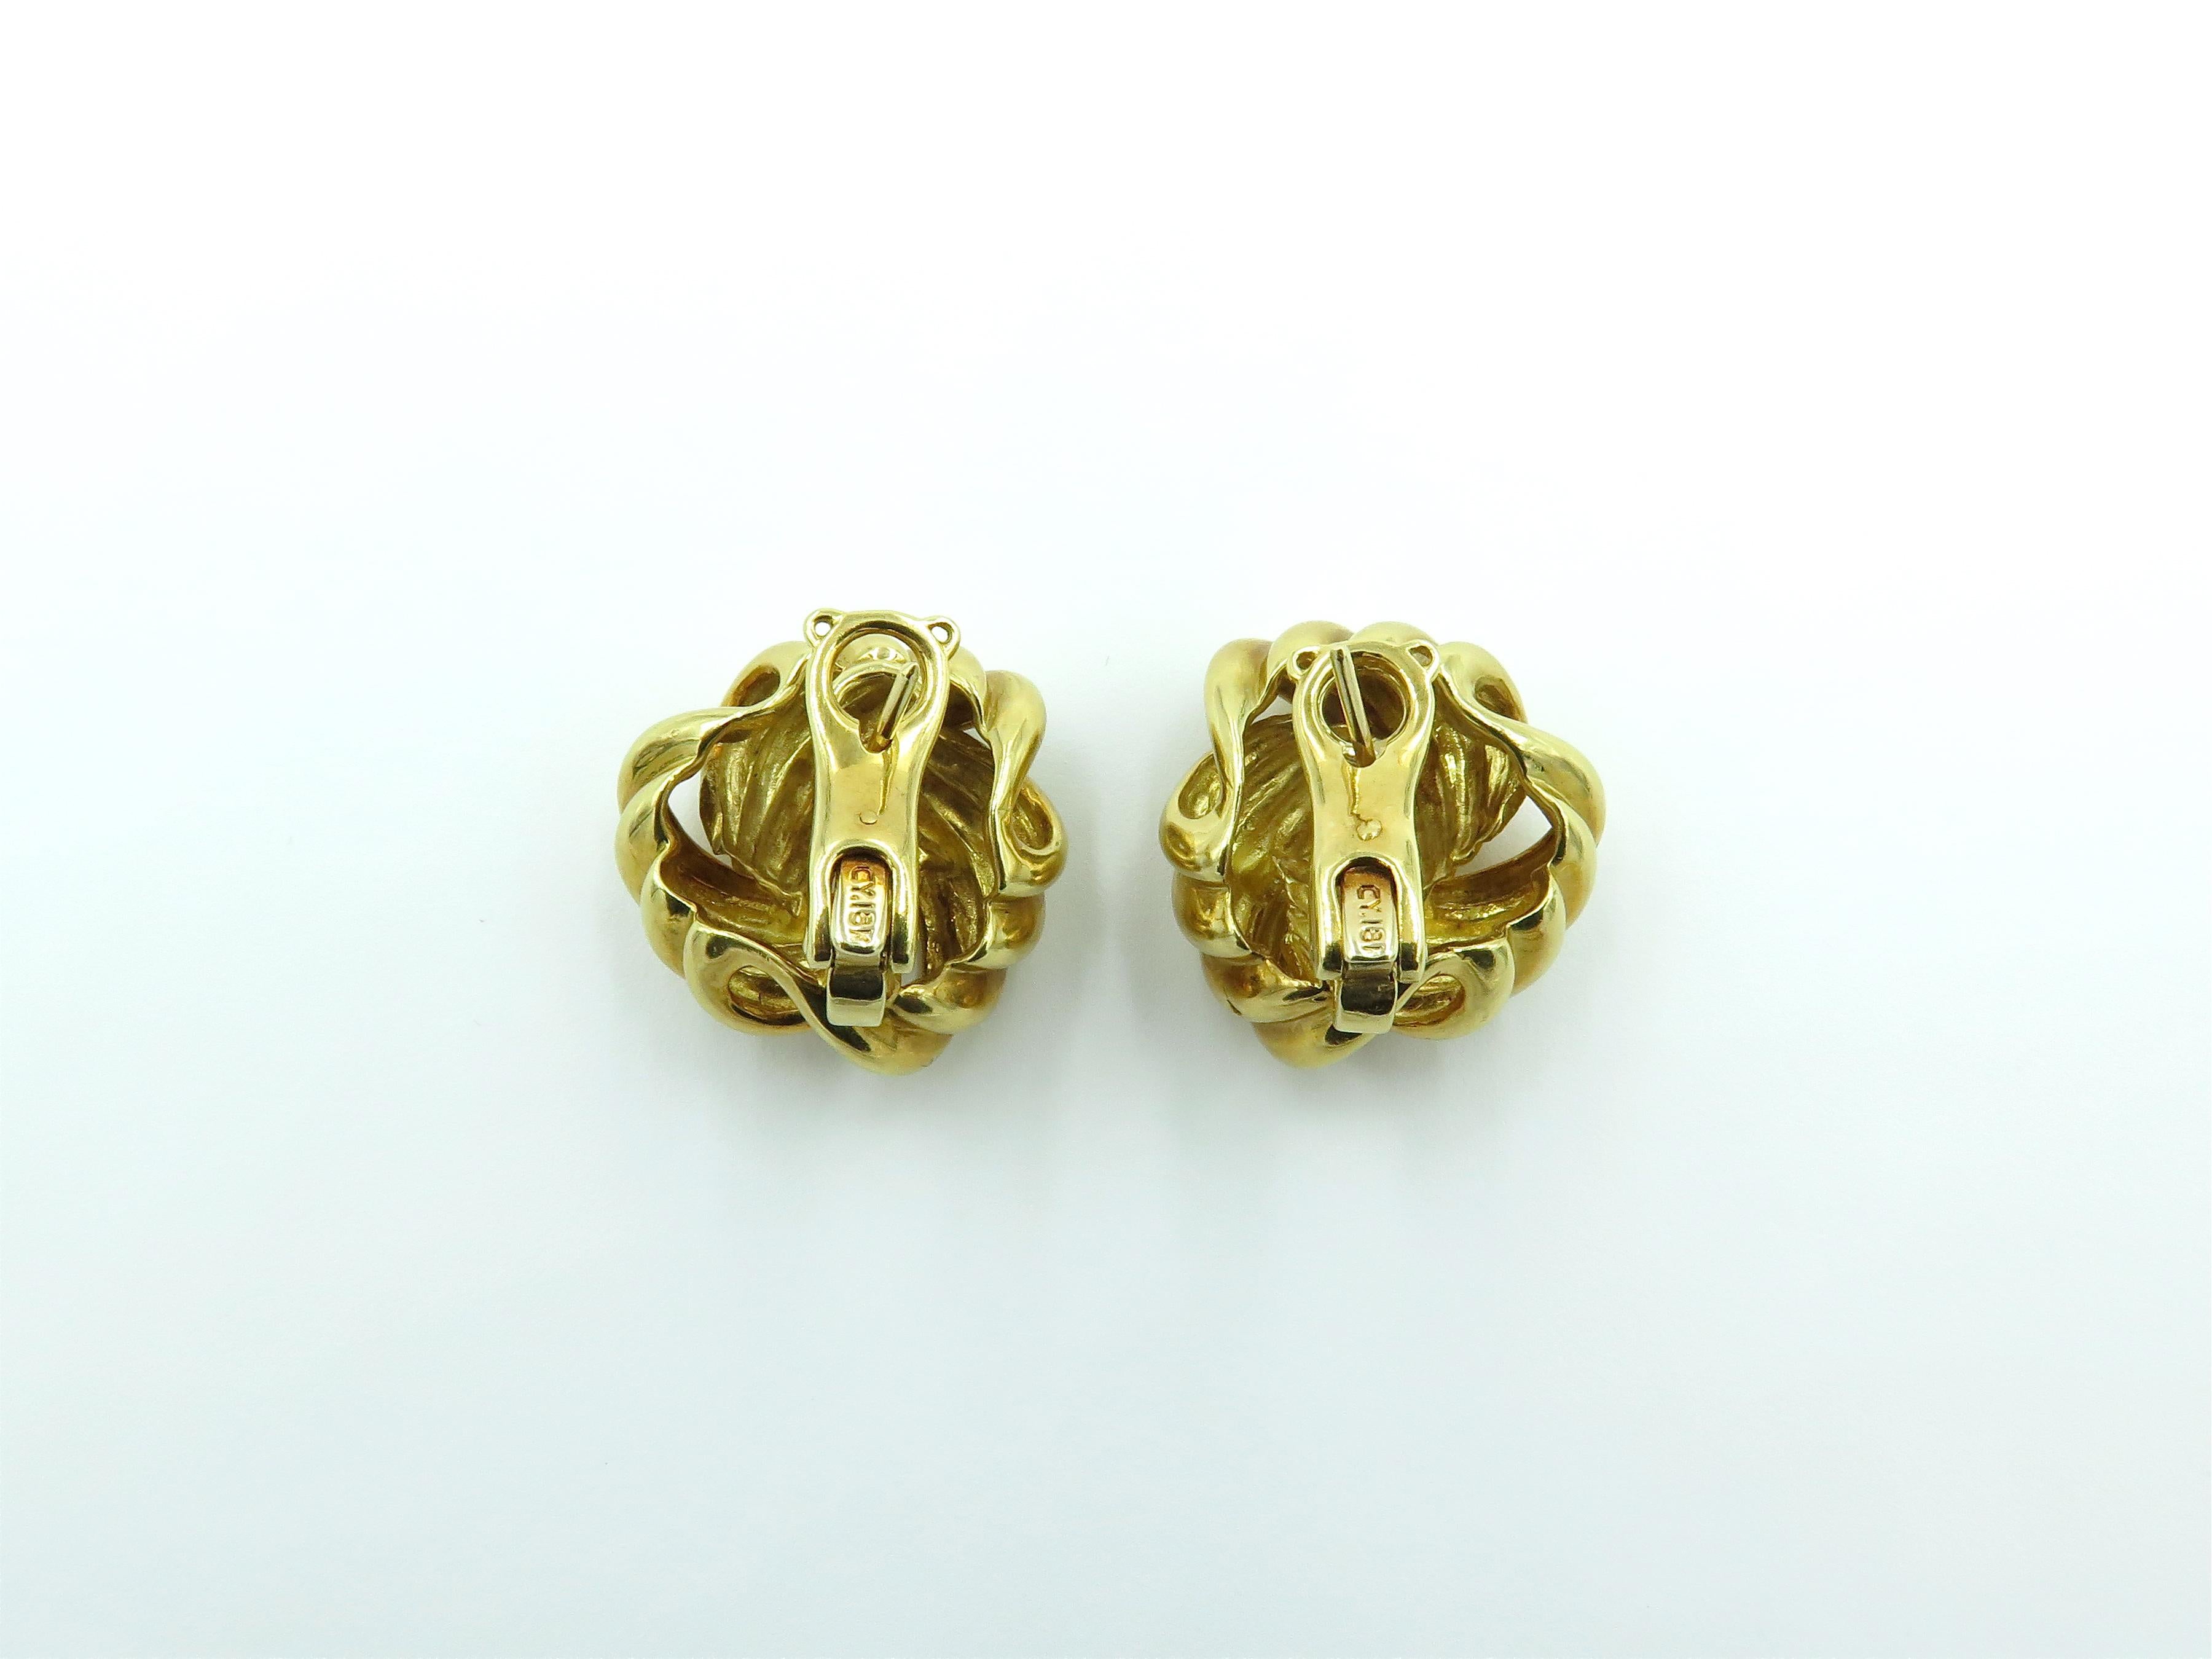 A pair of 18K yellow gold knot earrings. Stamped CY 18K. Gross weight approximately 23.3 grams.